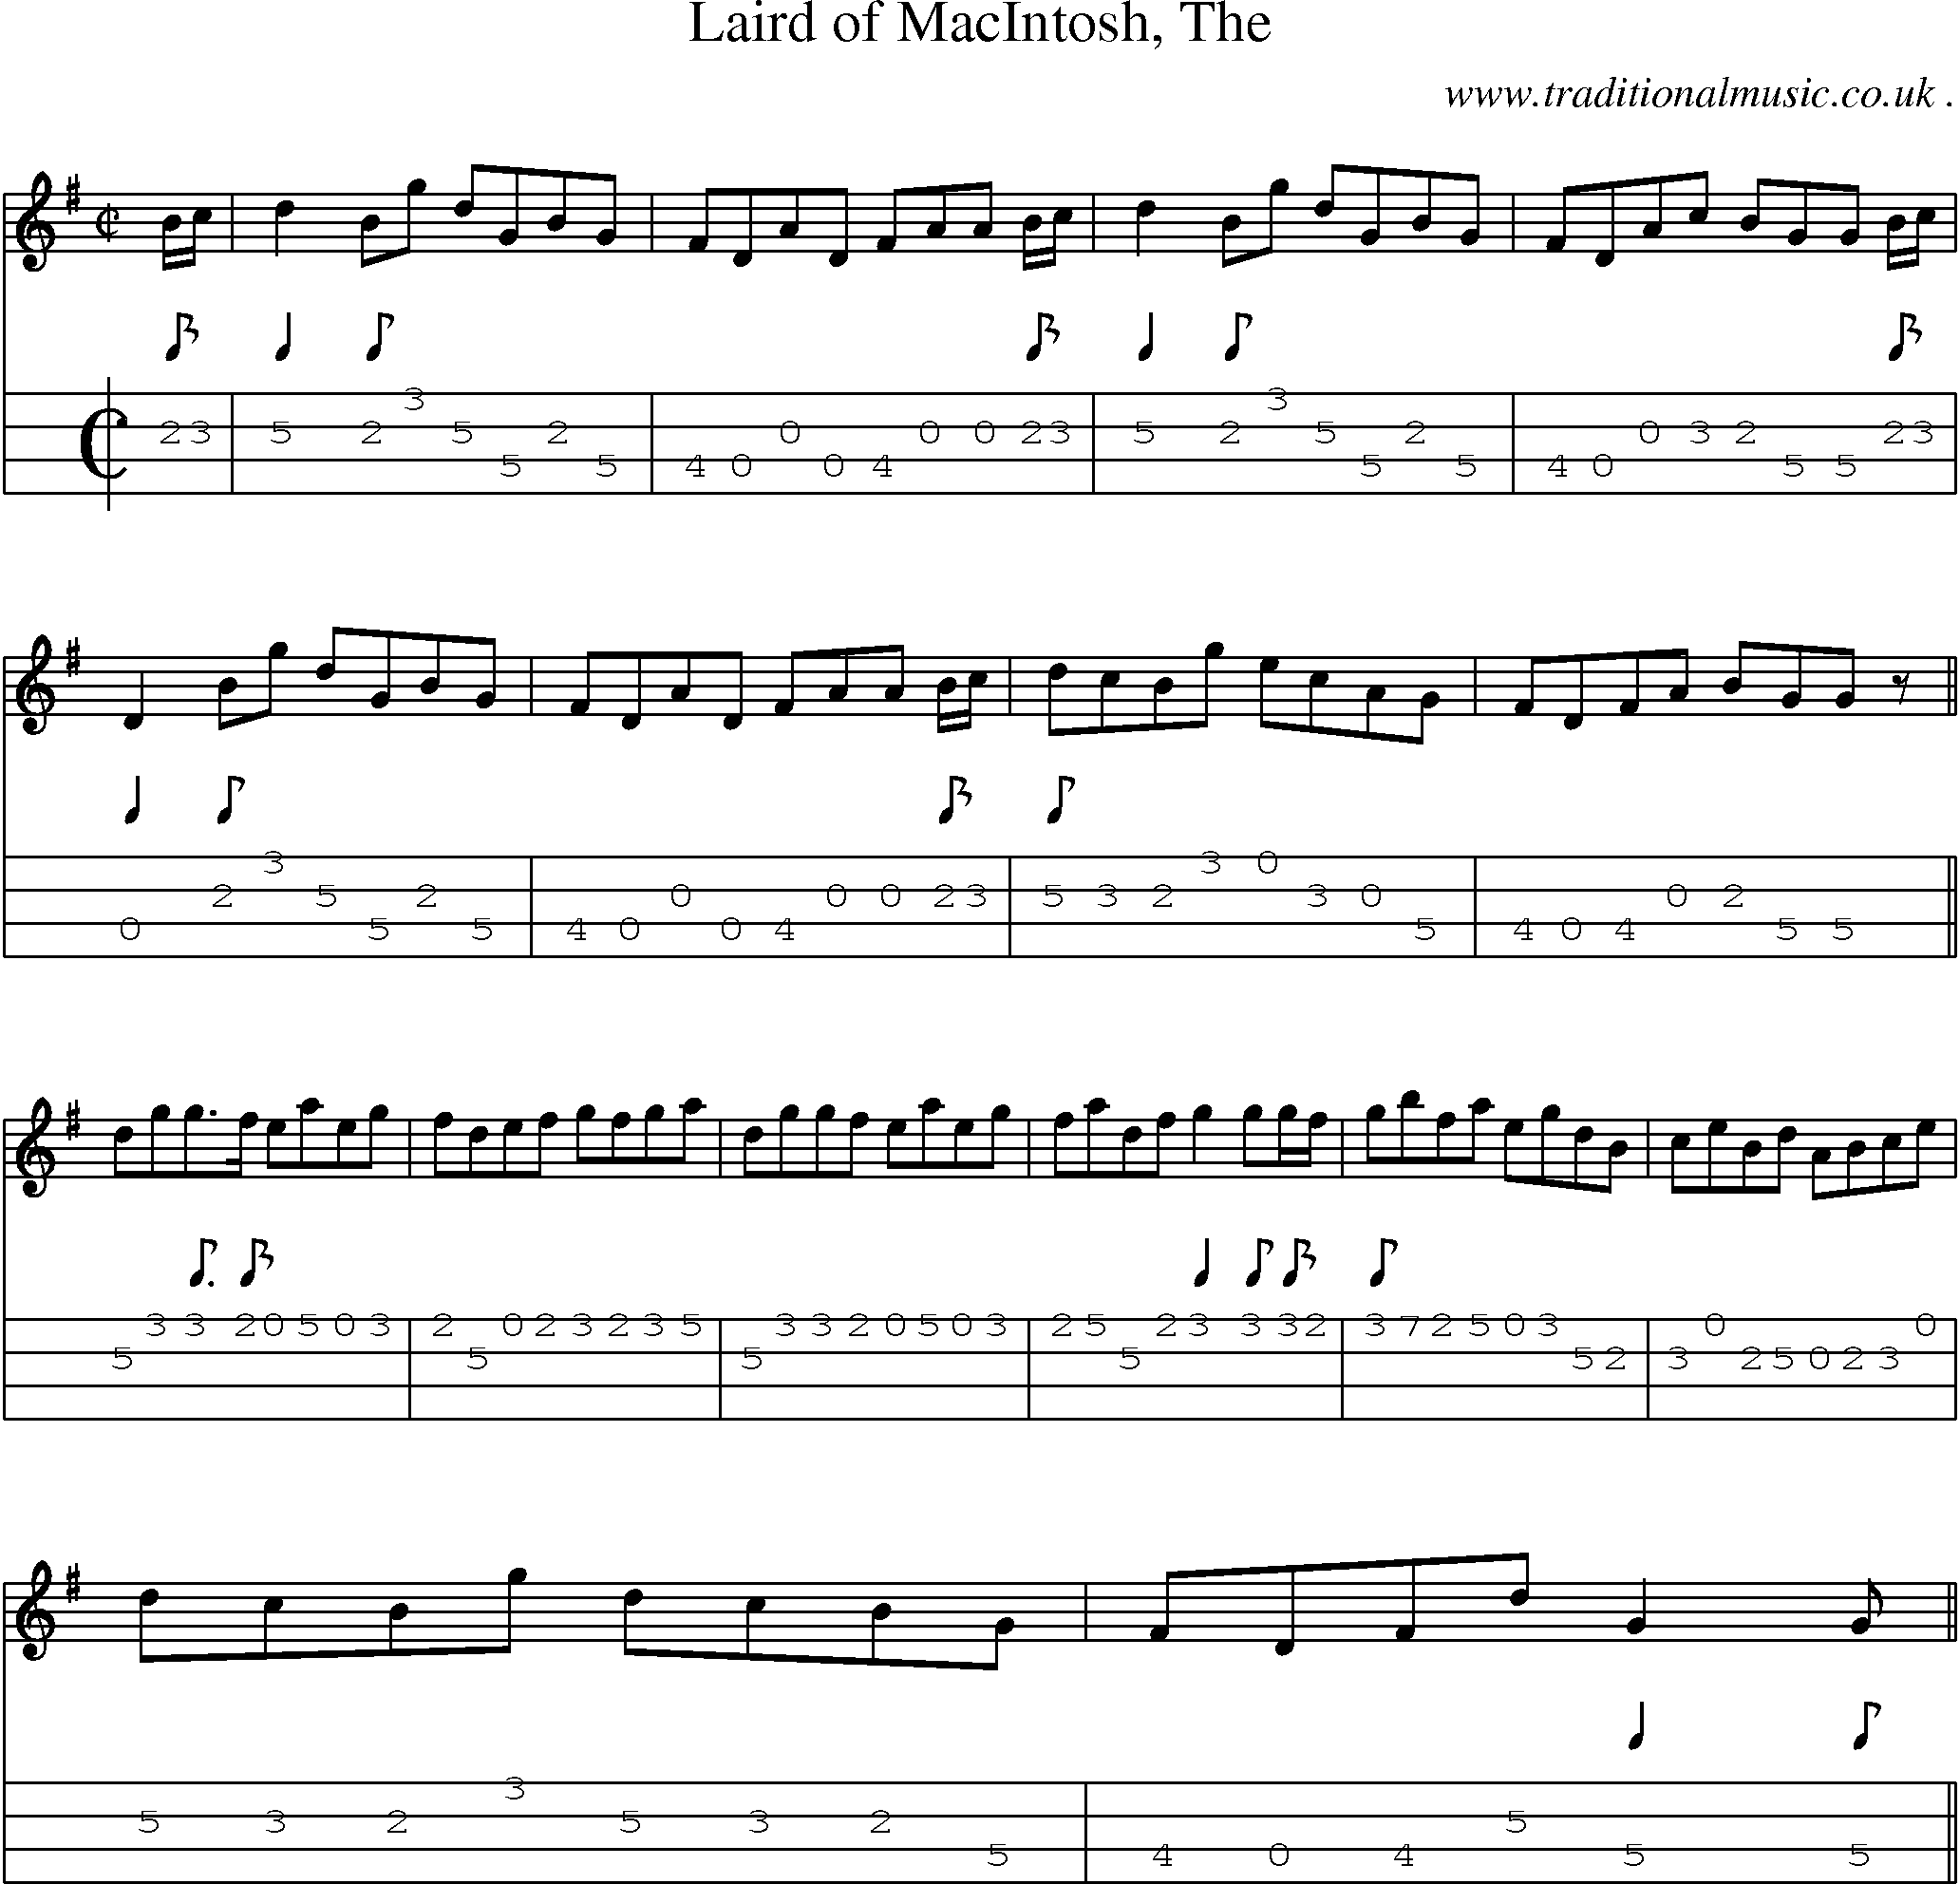 Sheet-music  score, Chords and Mandolin Tabs for Laird Of Macintosh The